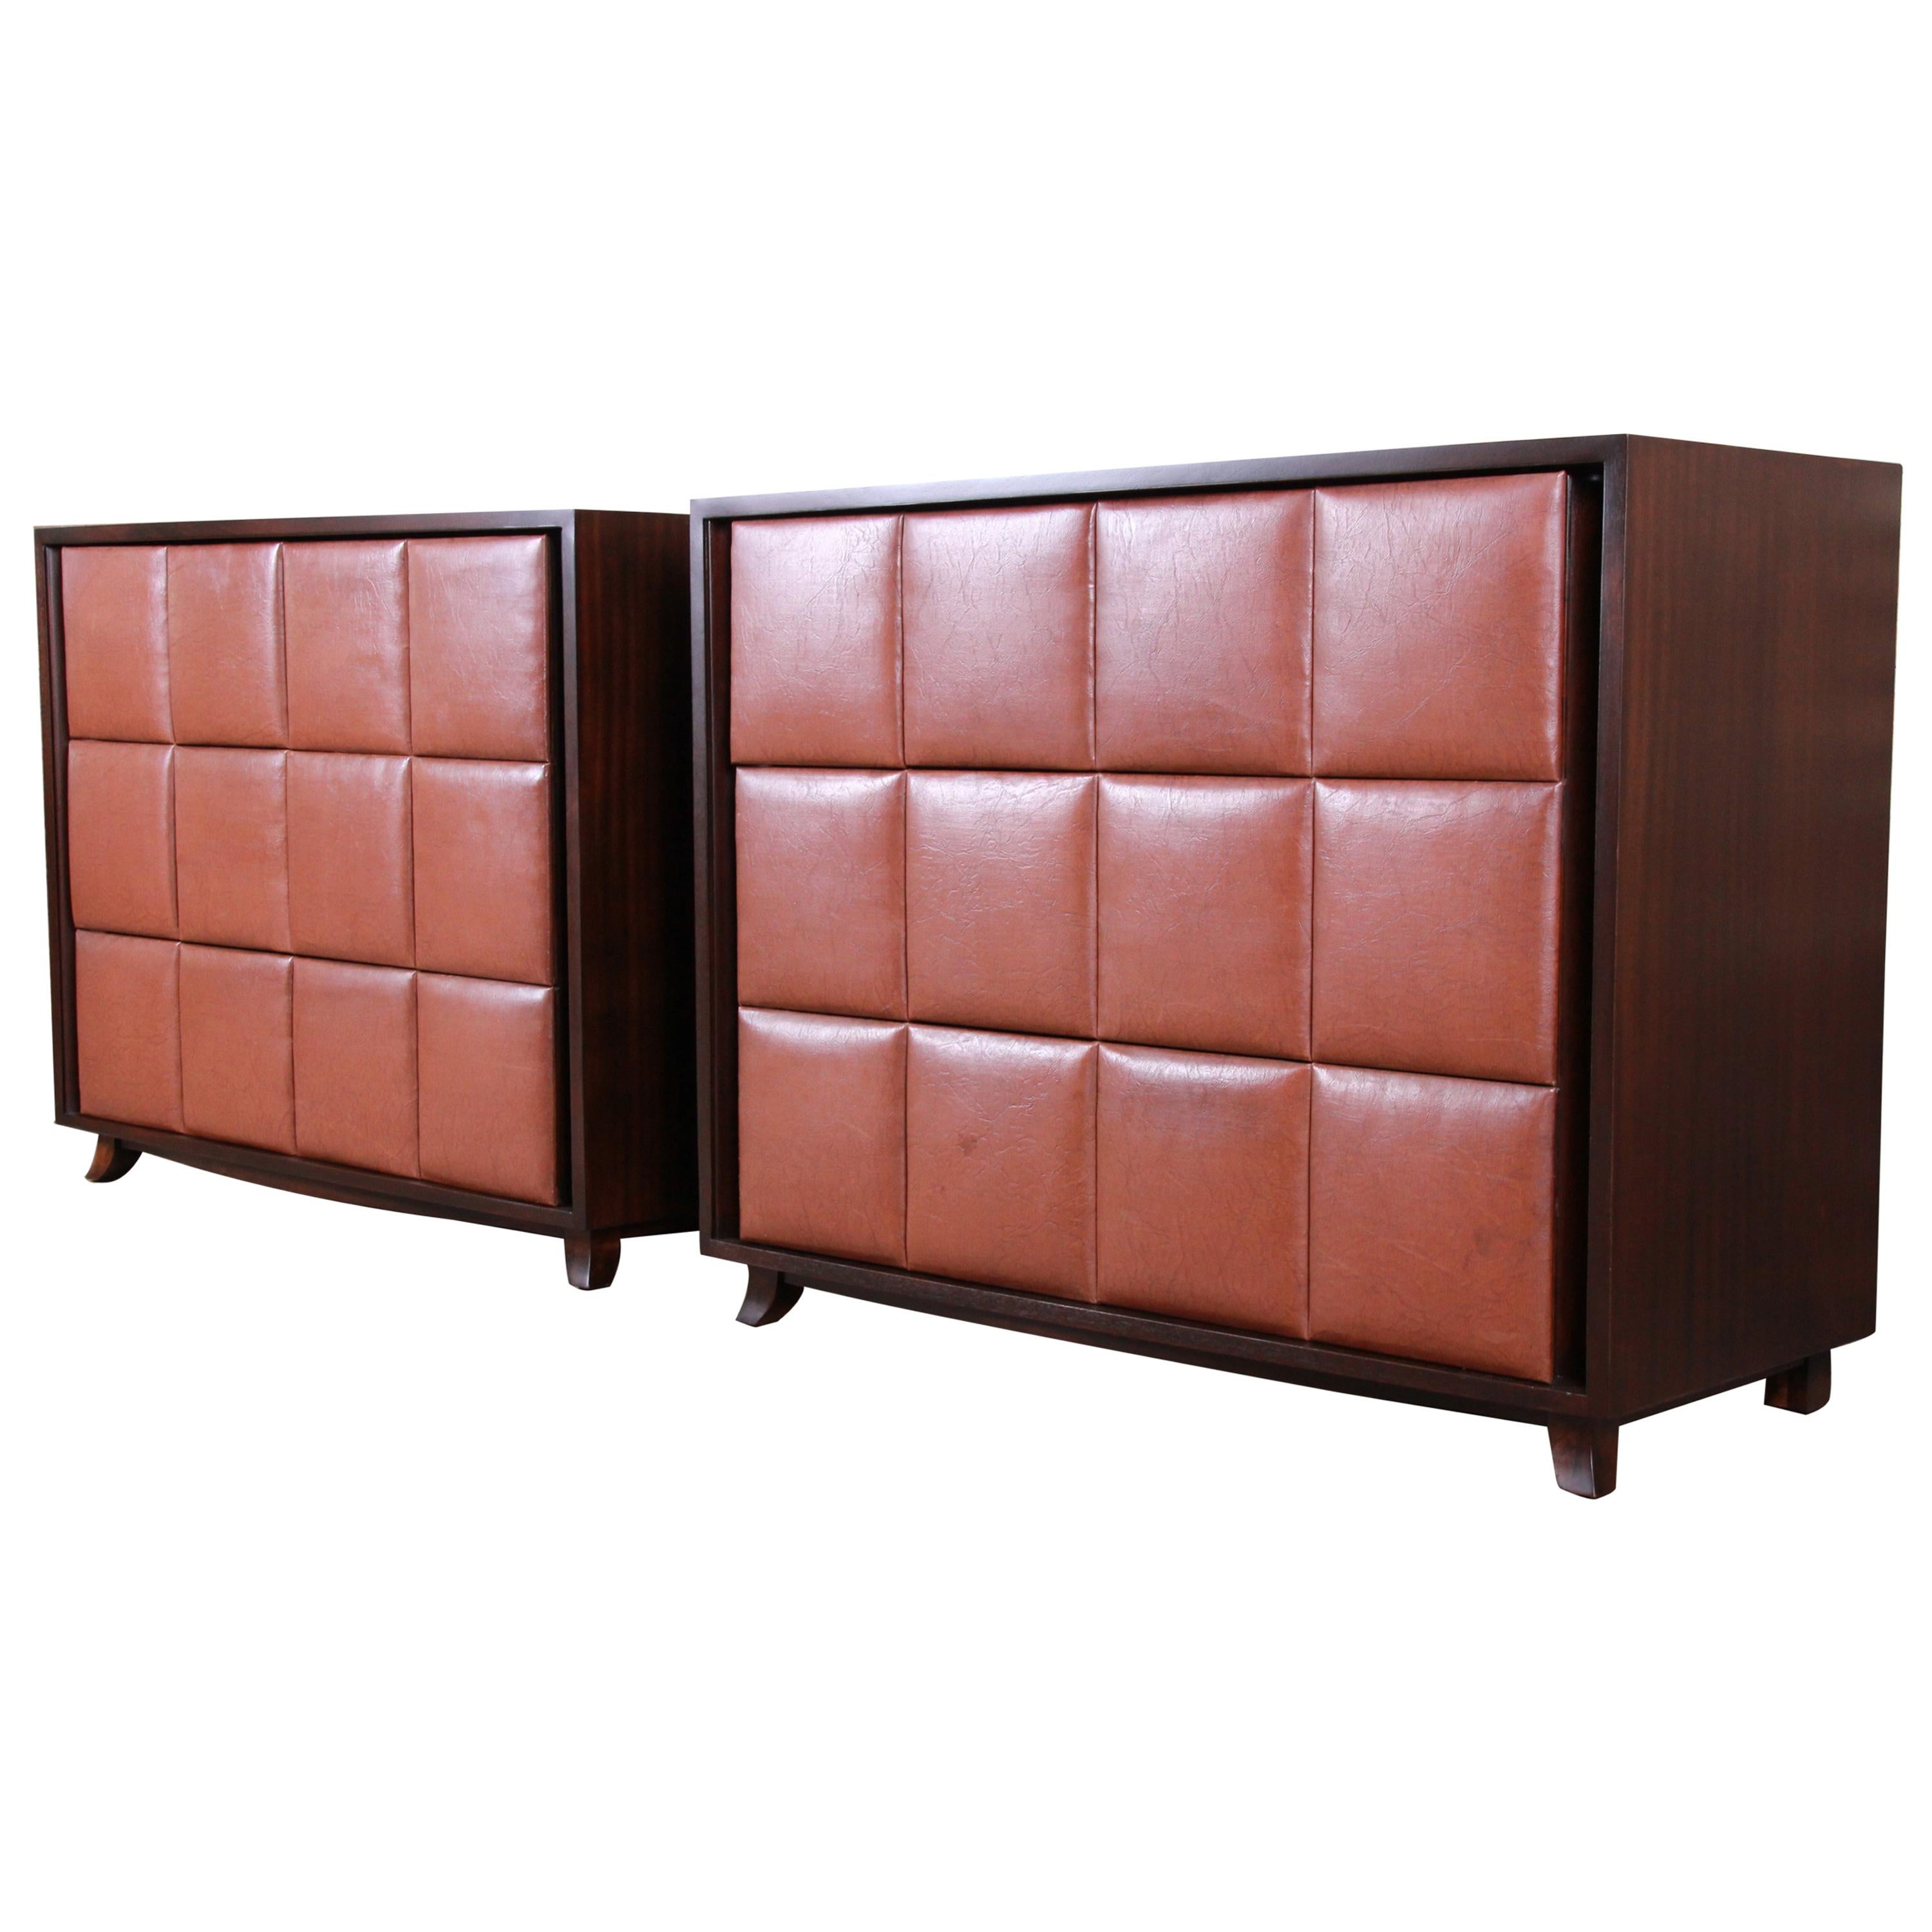 Gilbert Rohde for Herman Miller Bachelor Chests or Large Nightstands, Restored